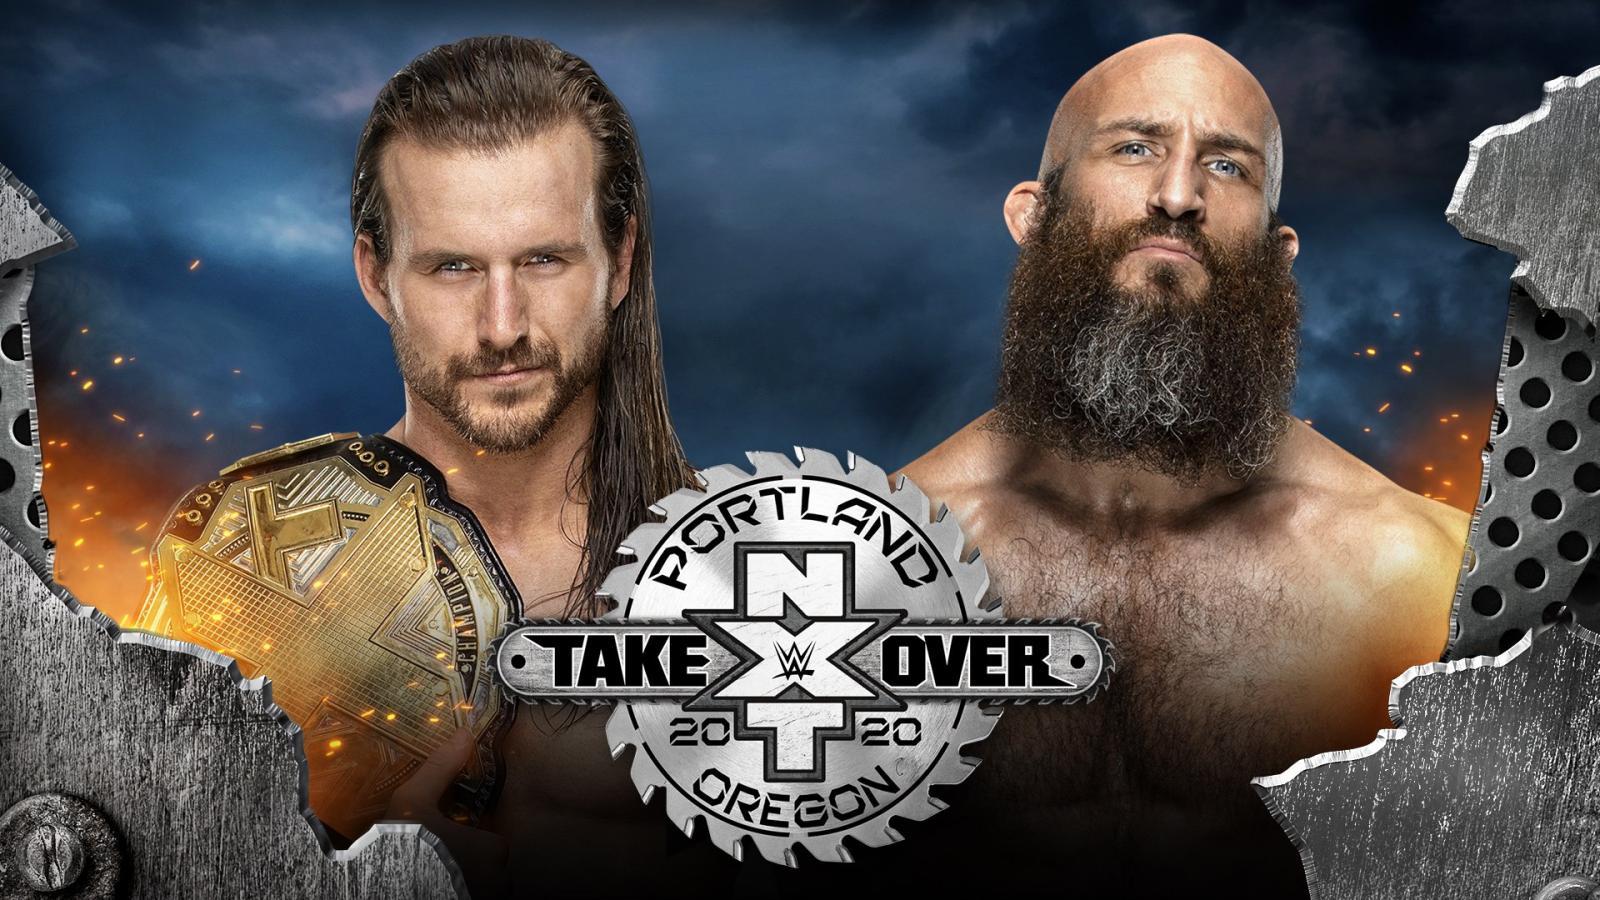 WWE NXT Takeover: Portland Results Adam Cole Reigns Supreme